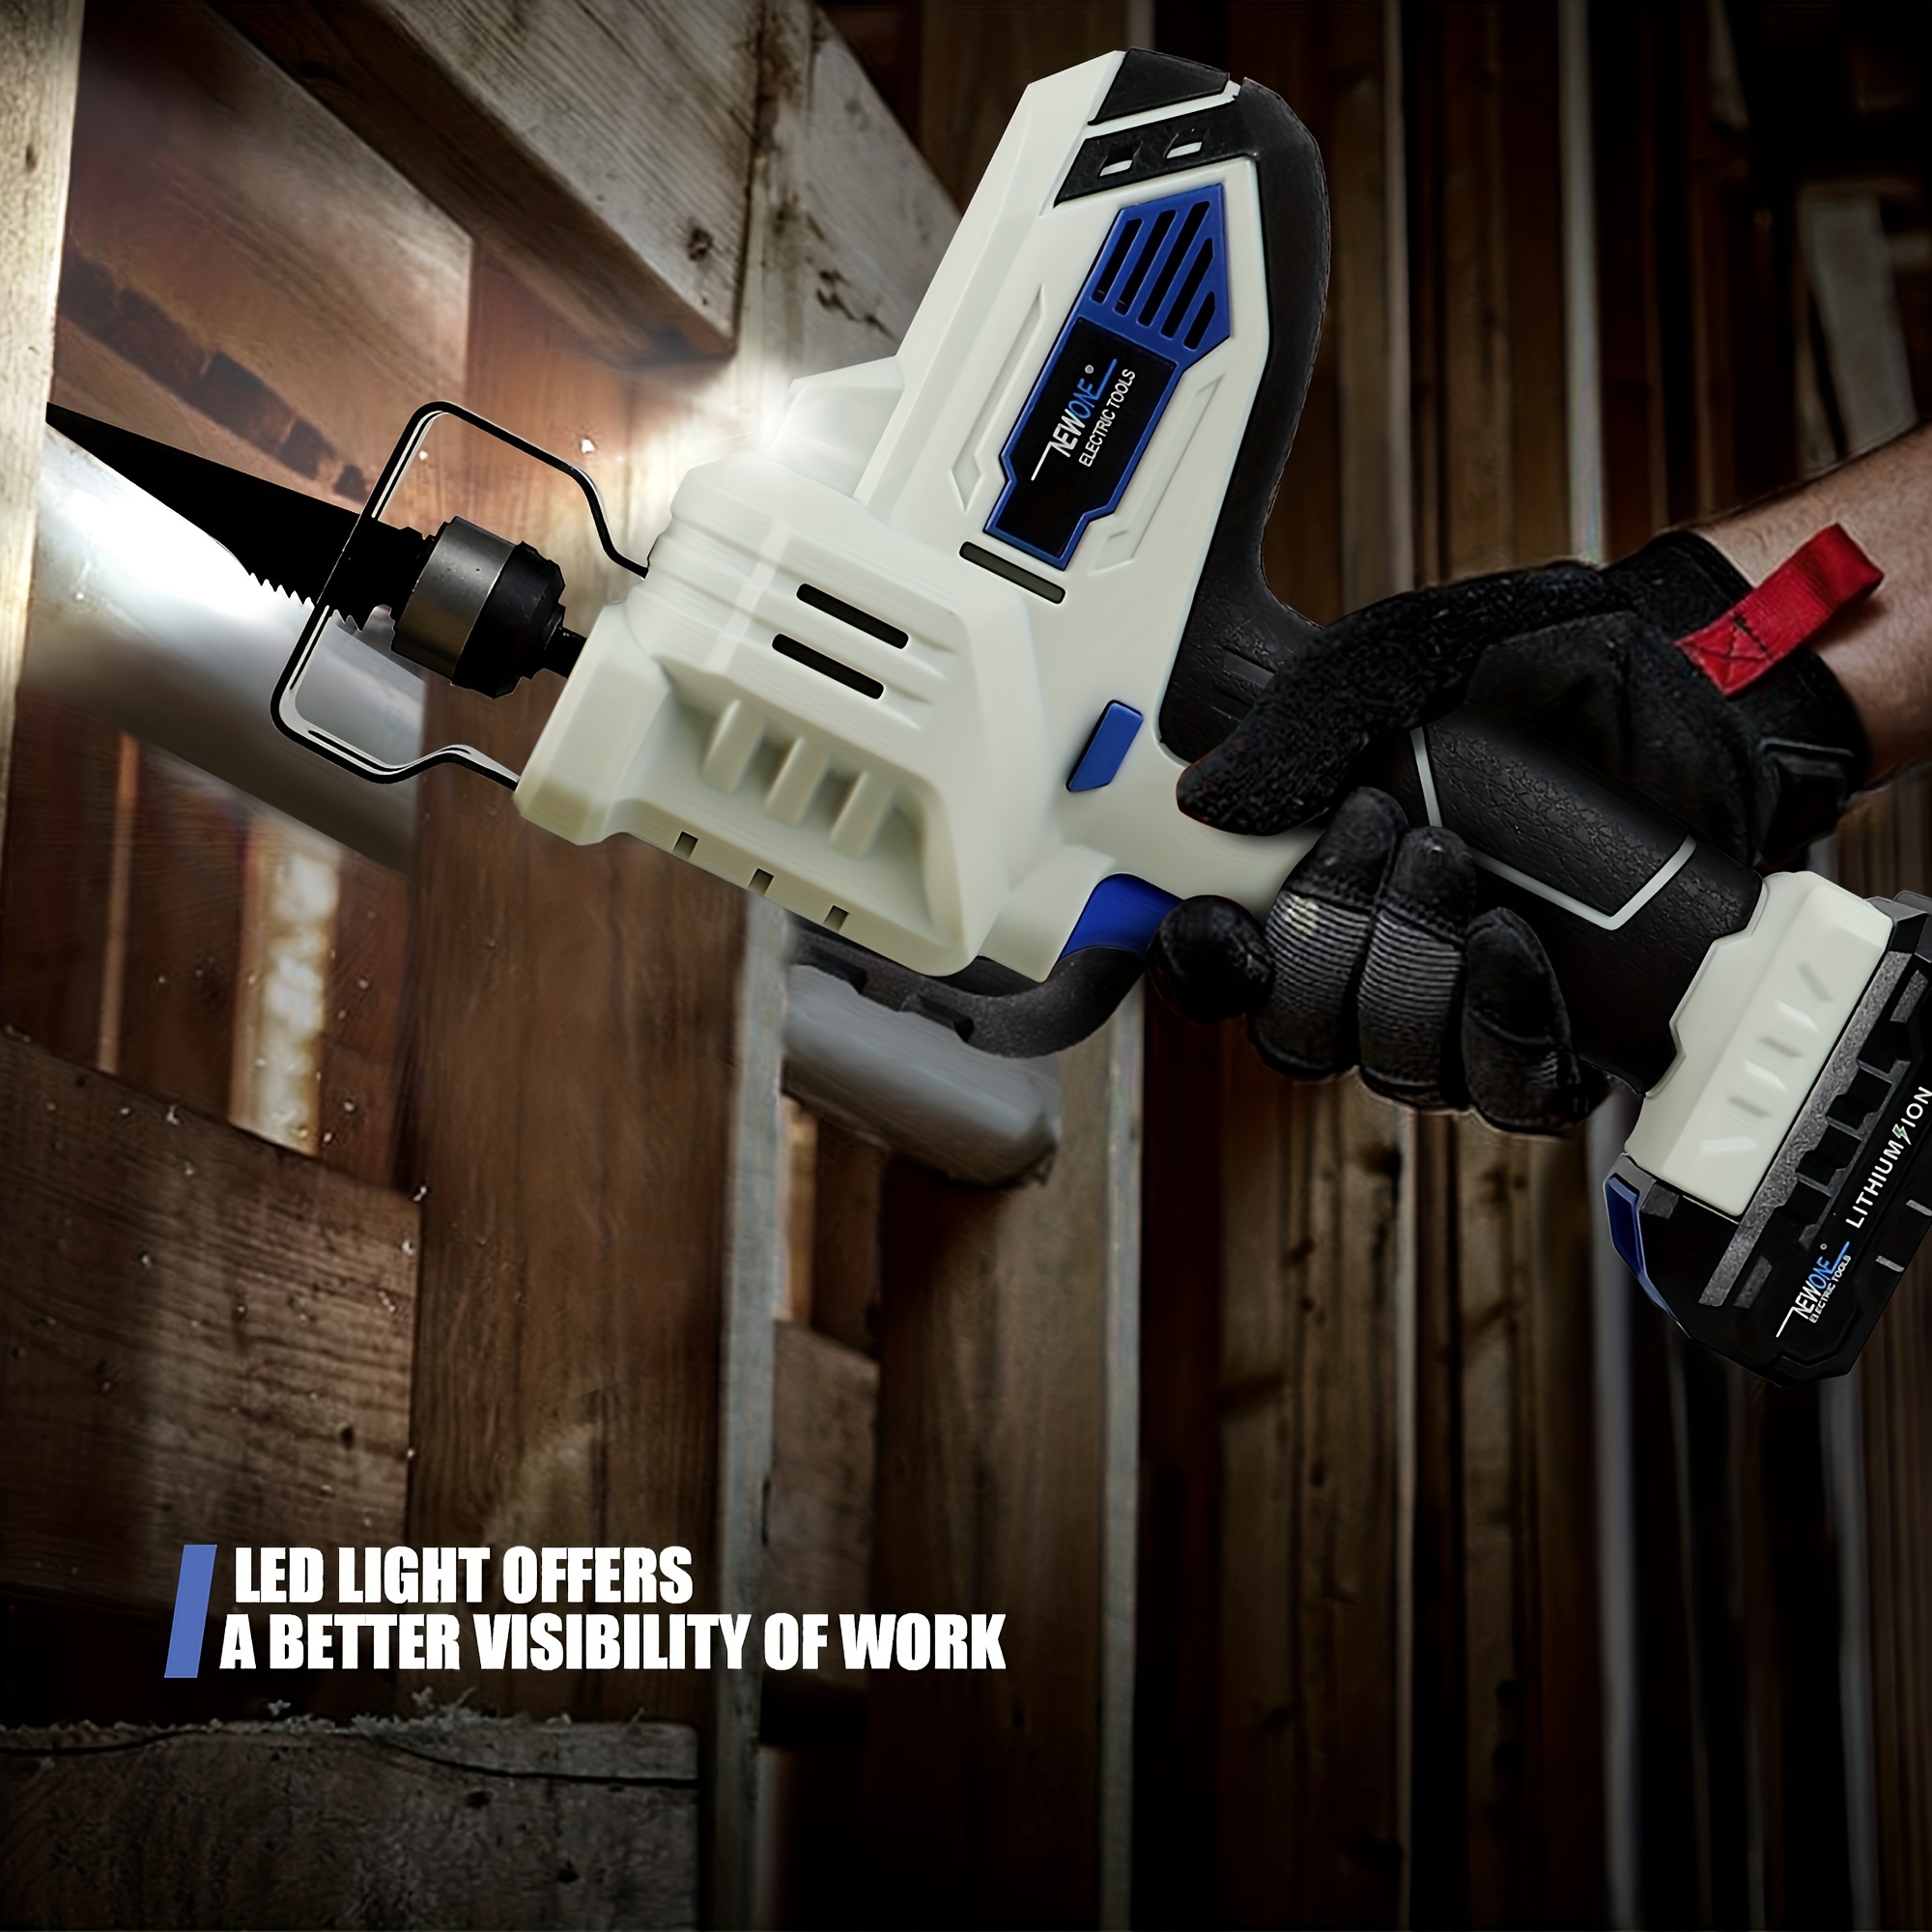 

12v Cordless Reciprocating Saw Compact With 2pcs Wood Blades Includes 2000mah Battery, Smart Charger And Usb Power Source